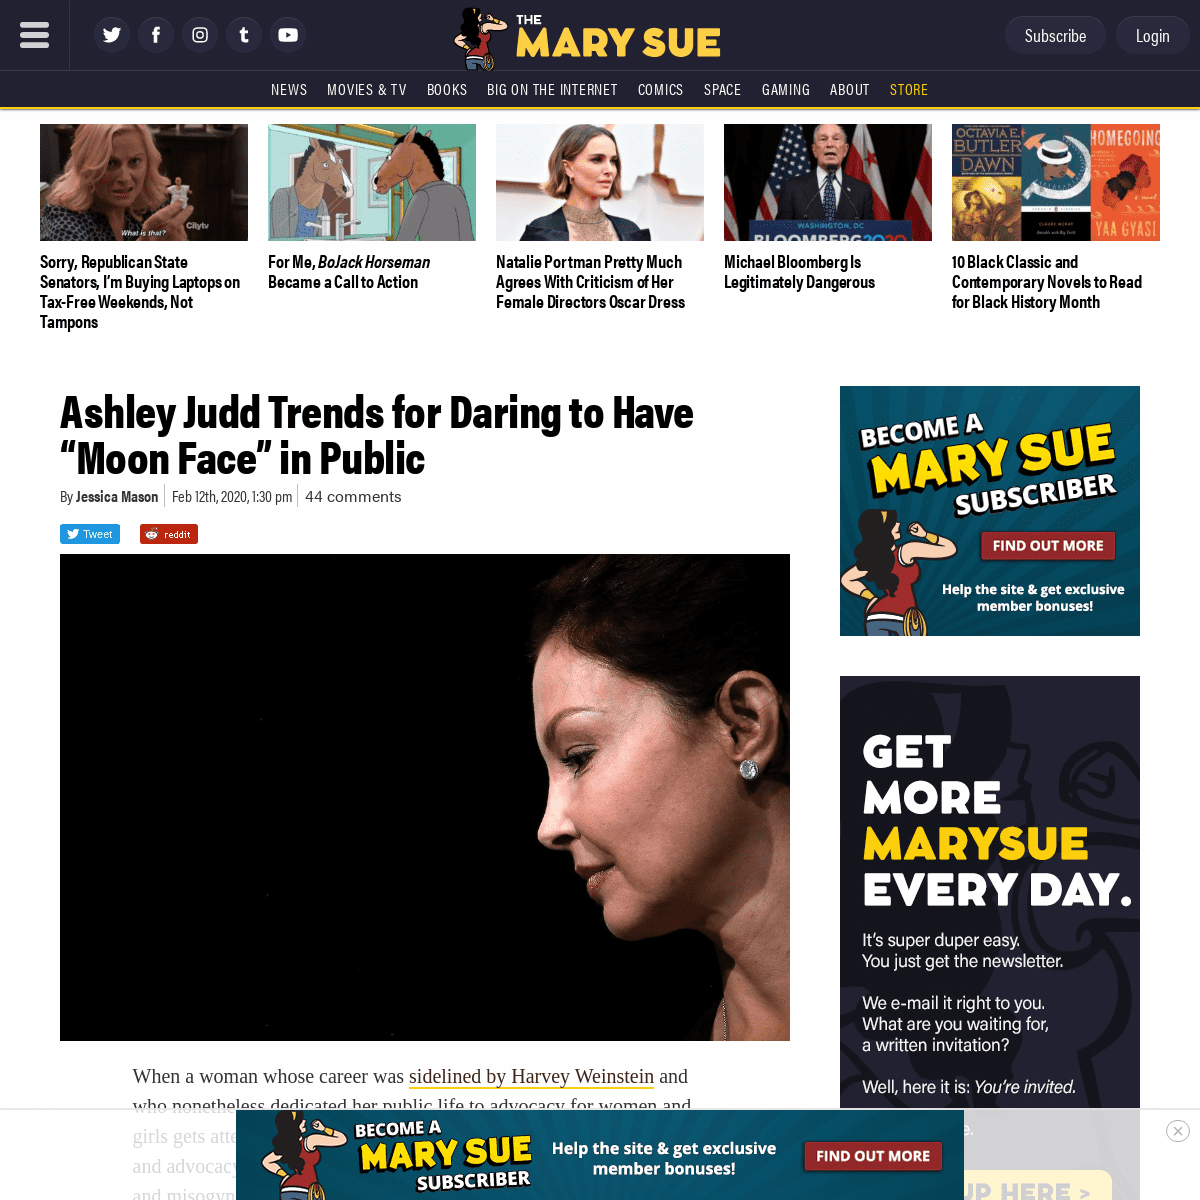 A complete backup of www.themarysue.com/ashley-judd-trends-for-the-wrong-reasons/